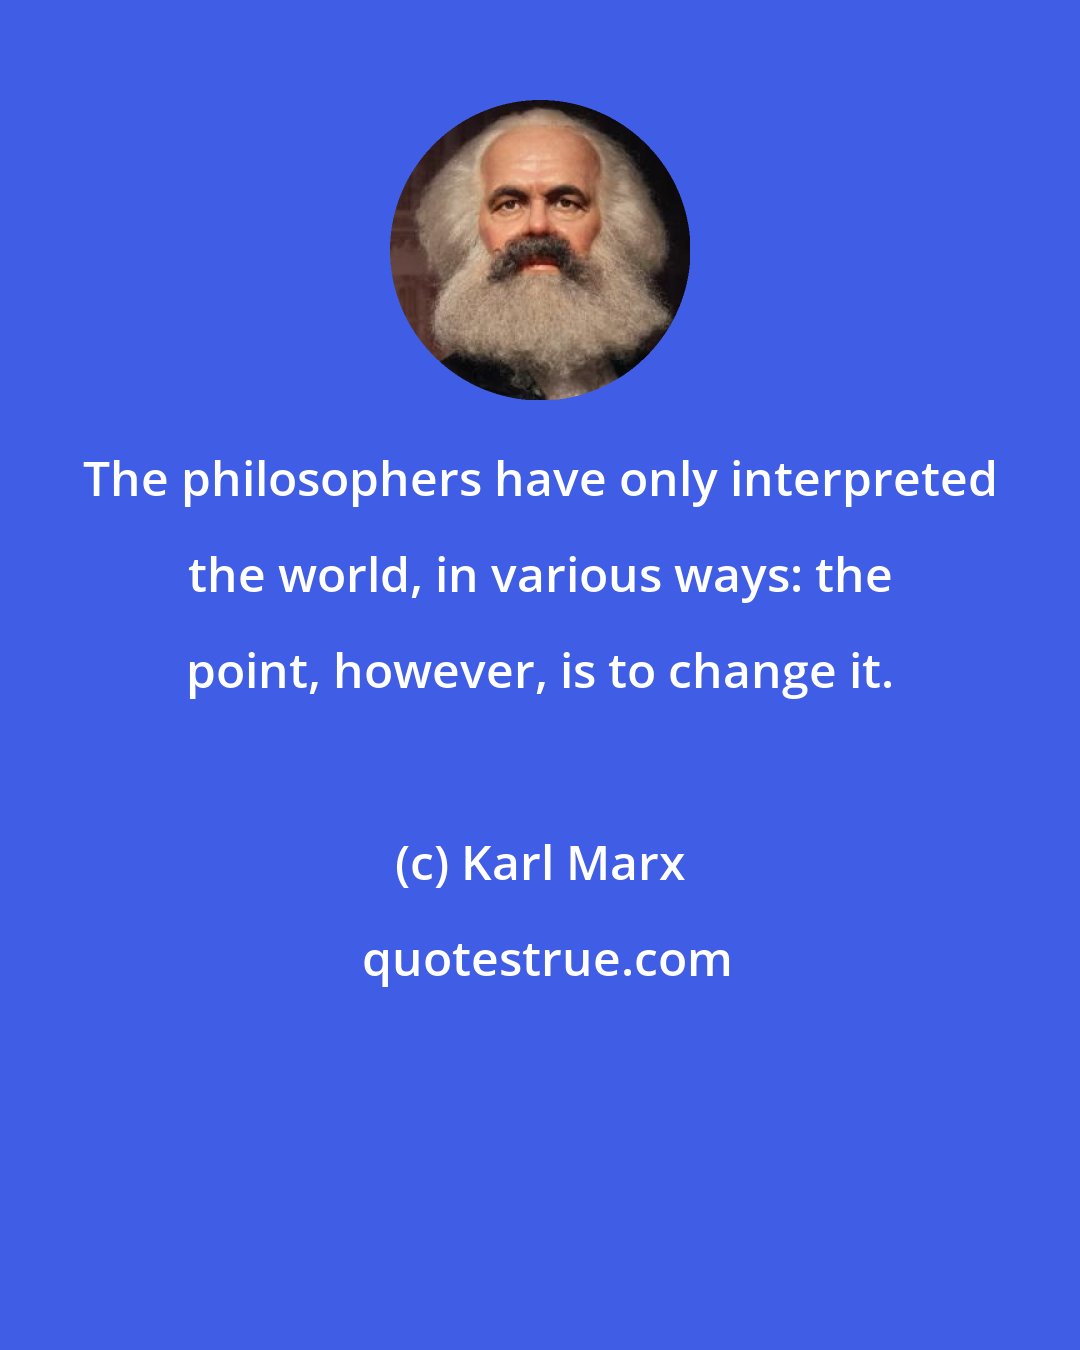 Karl Marx: The philosophers have only interpreted the world, in various ways: the point, however, is to change it.